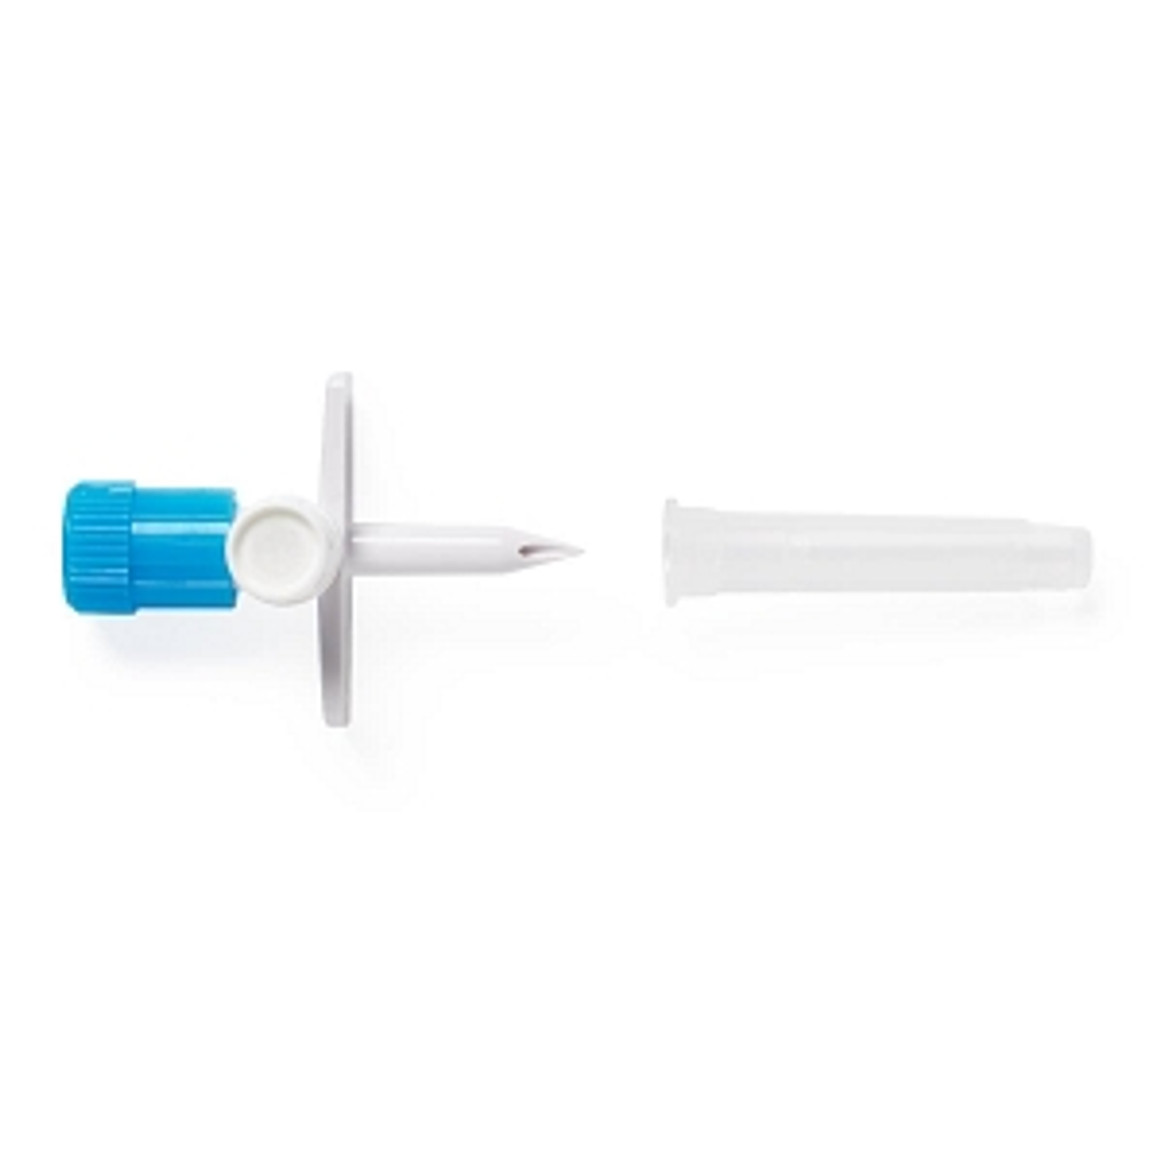 IV Set Accessories: Mini Vented Transfer Pin with Air-Venting Filter